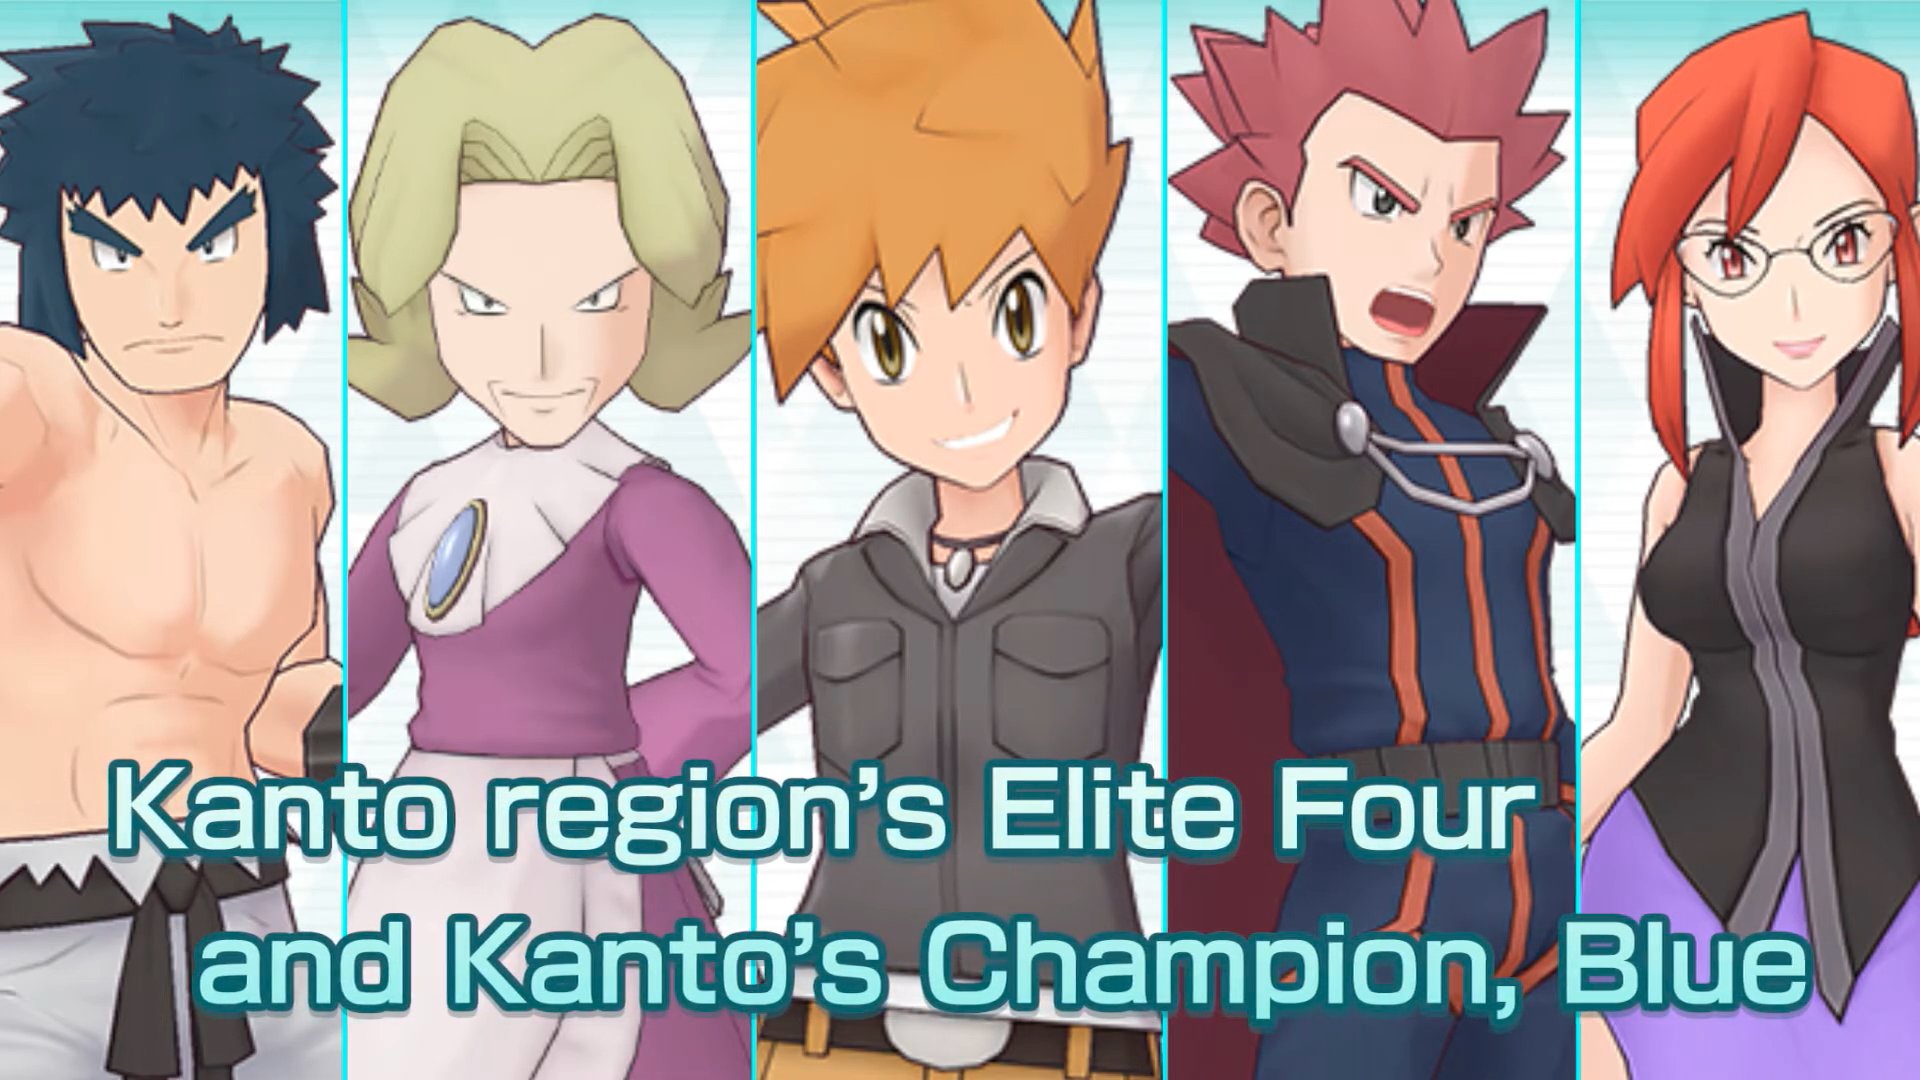 Pokémon Masters EX Twitter: "Highlight 3/4 On August (PDT), the Champion Stadium's Kanto Challenge will begin. Here, you'll face off against the Kanto region's Elite and Kanto's Champion, Blue.